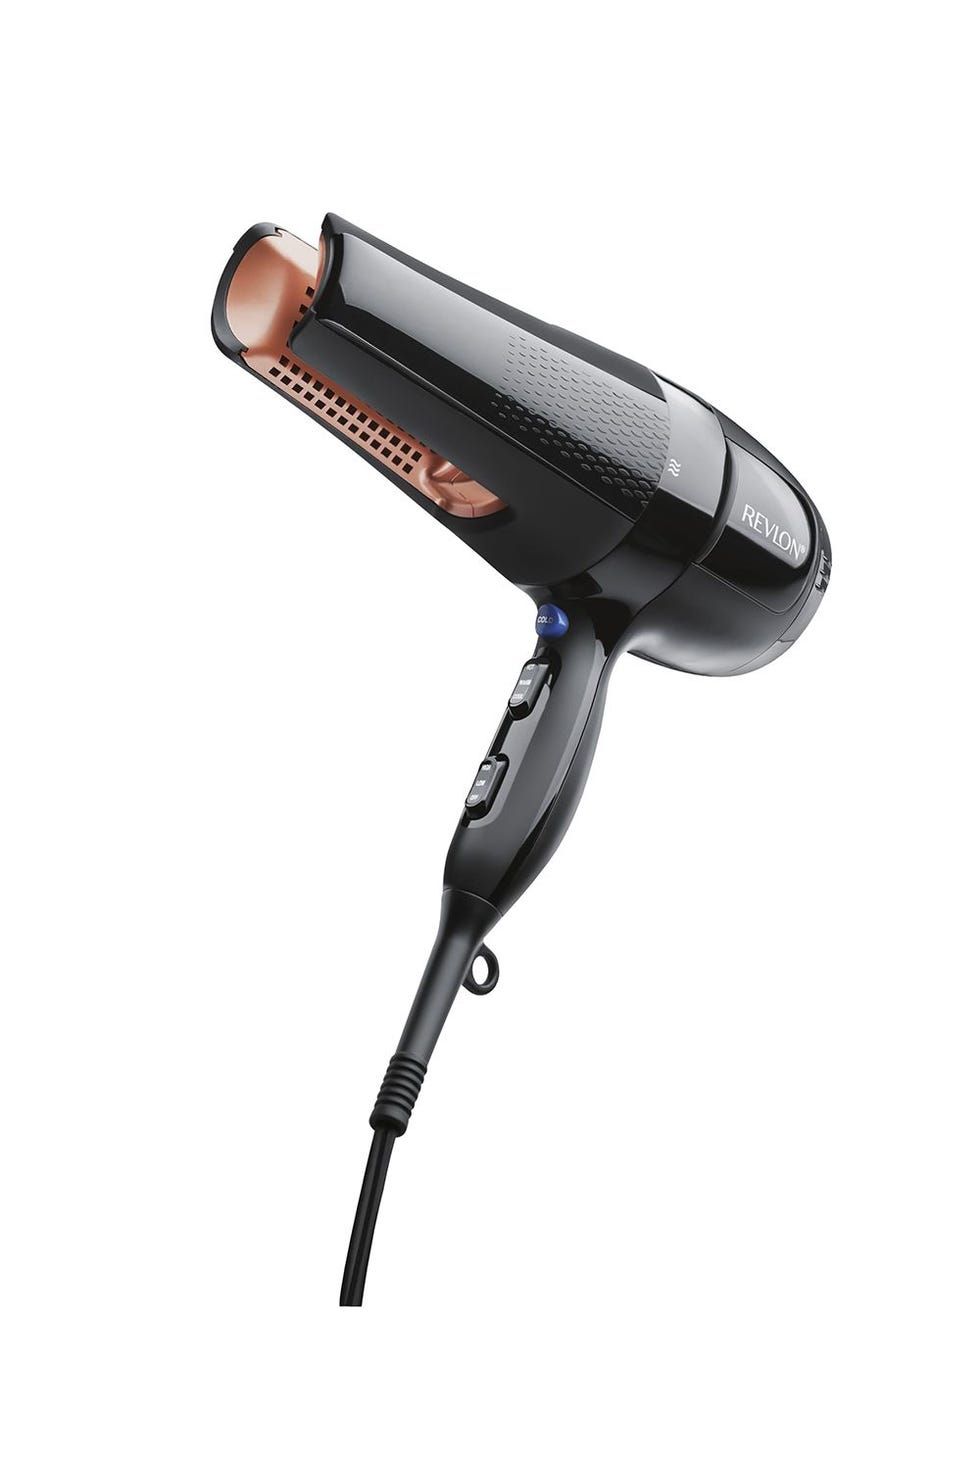 15 Best Hair Dryers of 2022 - Top-Rated Blow Dryers